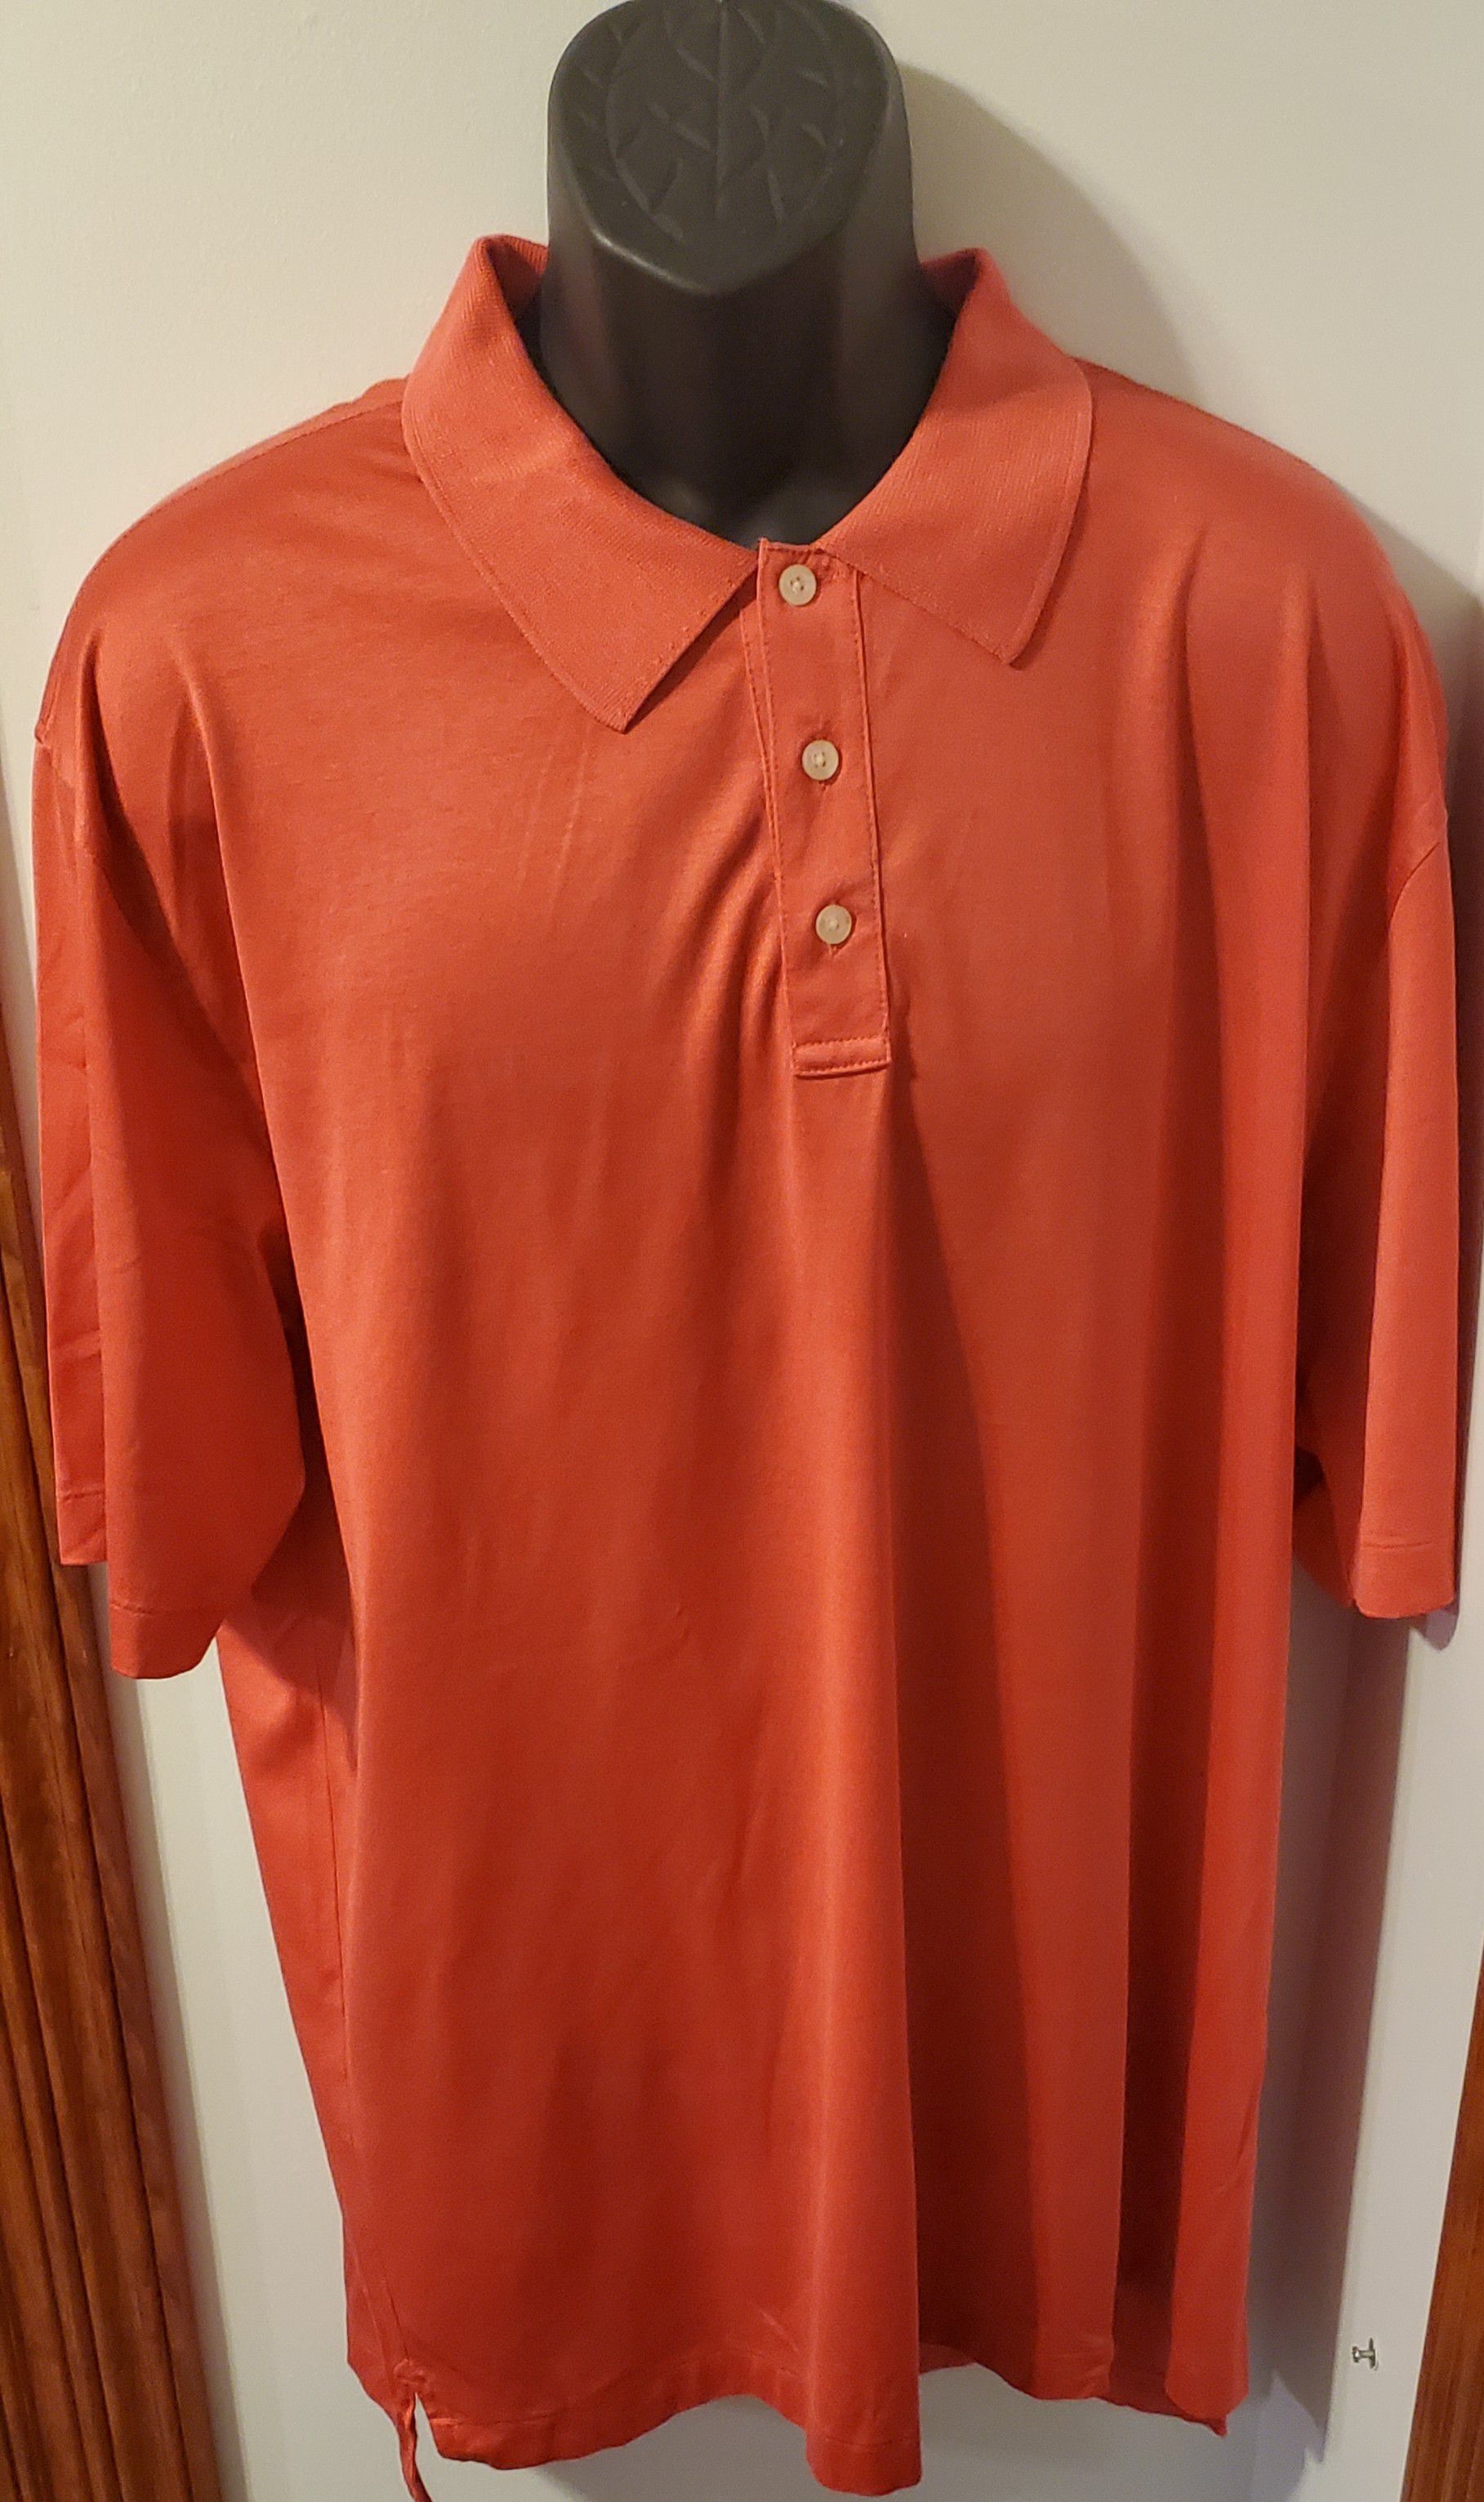 Brooks Brothers Salmon Colored Collared Short Sleeve Polo Shirt